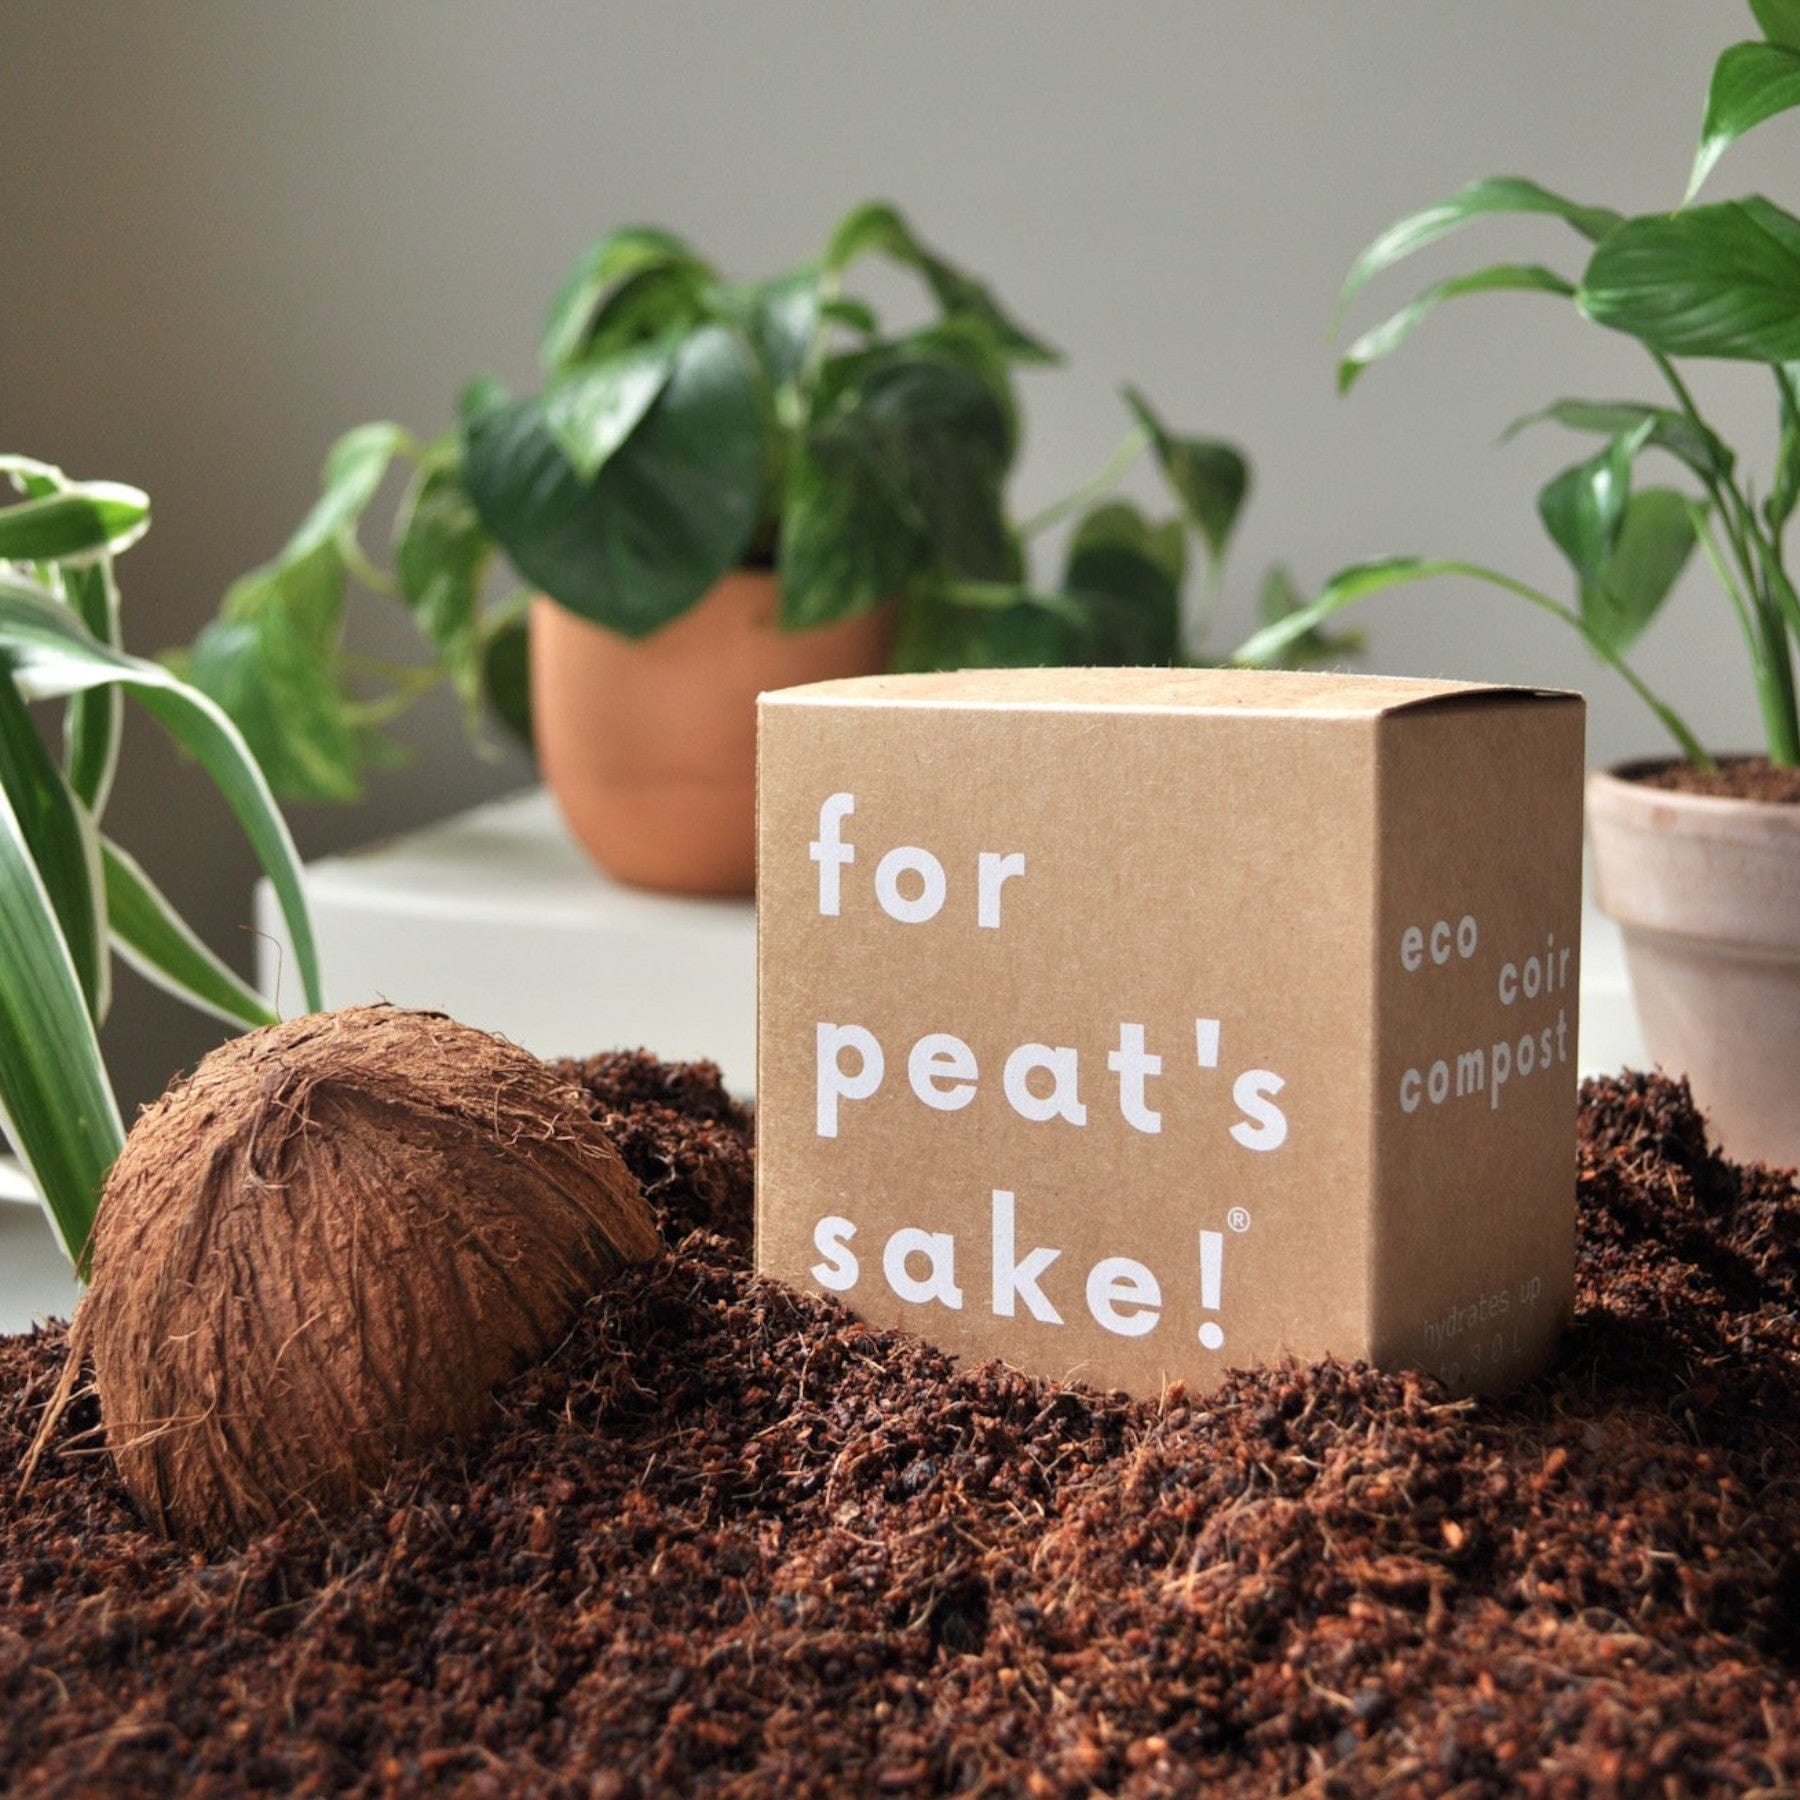 Eco-friendly coir compost packaging with humorous slogan "for peat's sake" beside a coconut husk and scattered coir on table with potted plants in the background promoting sustainable gardening